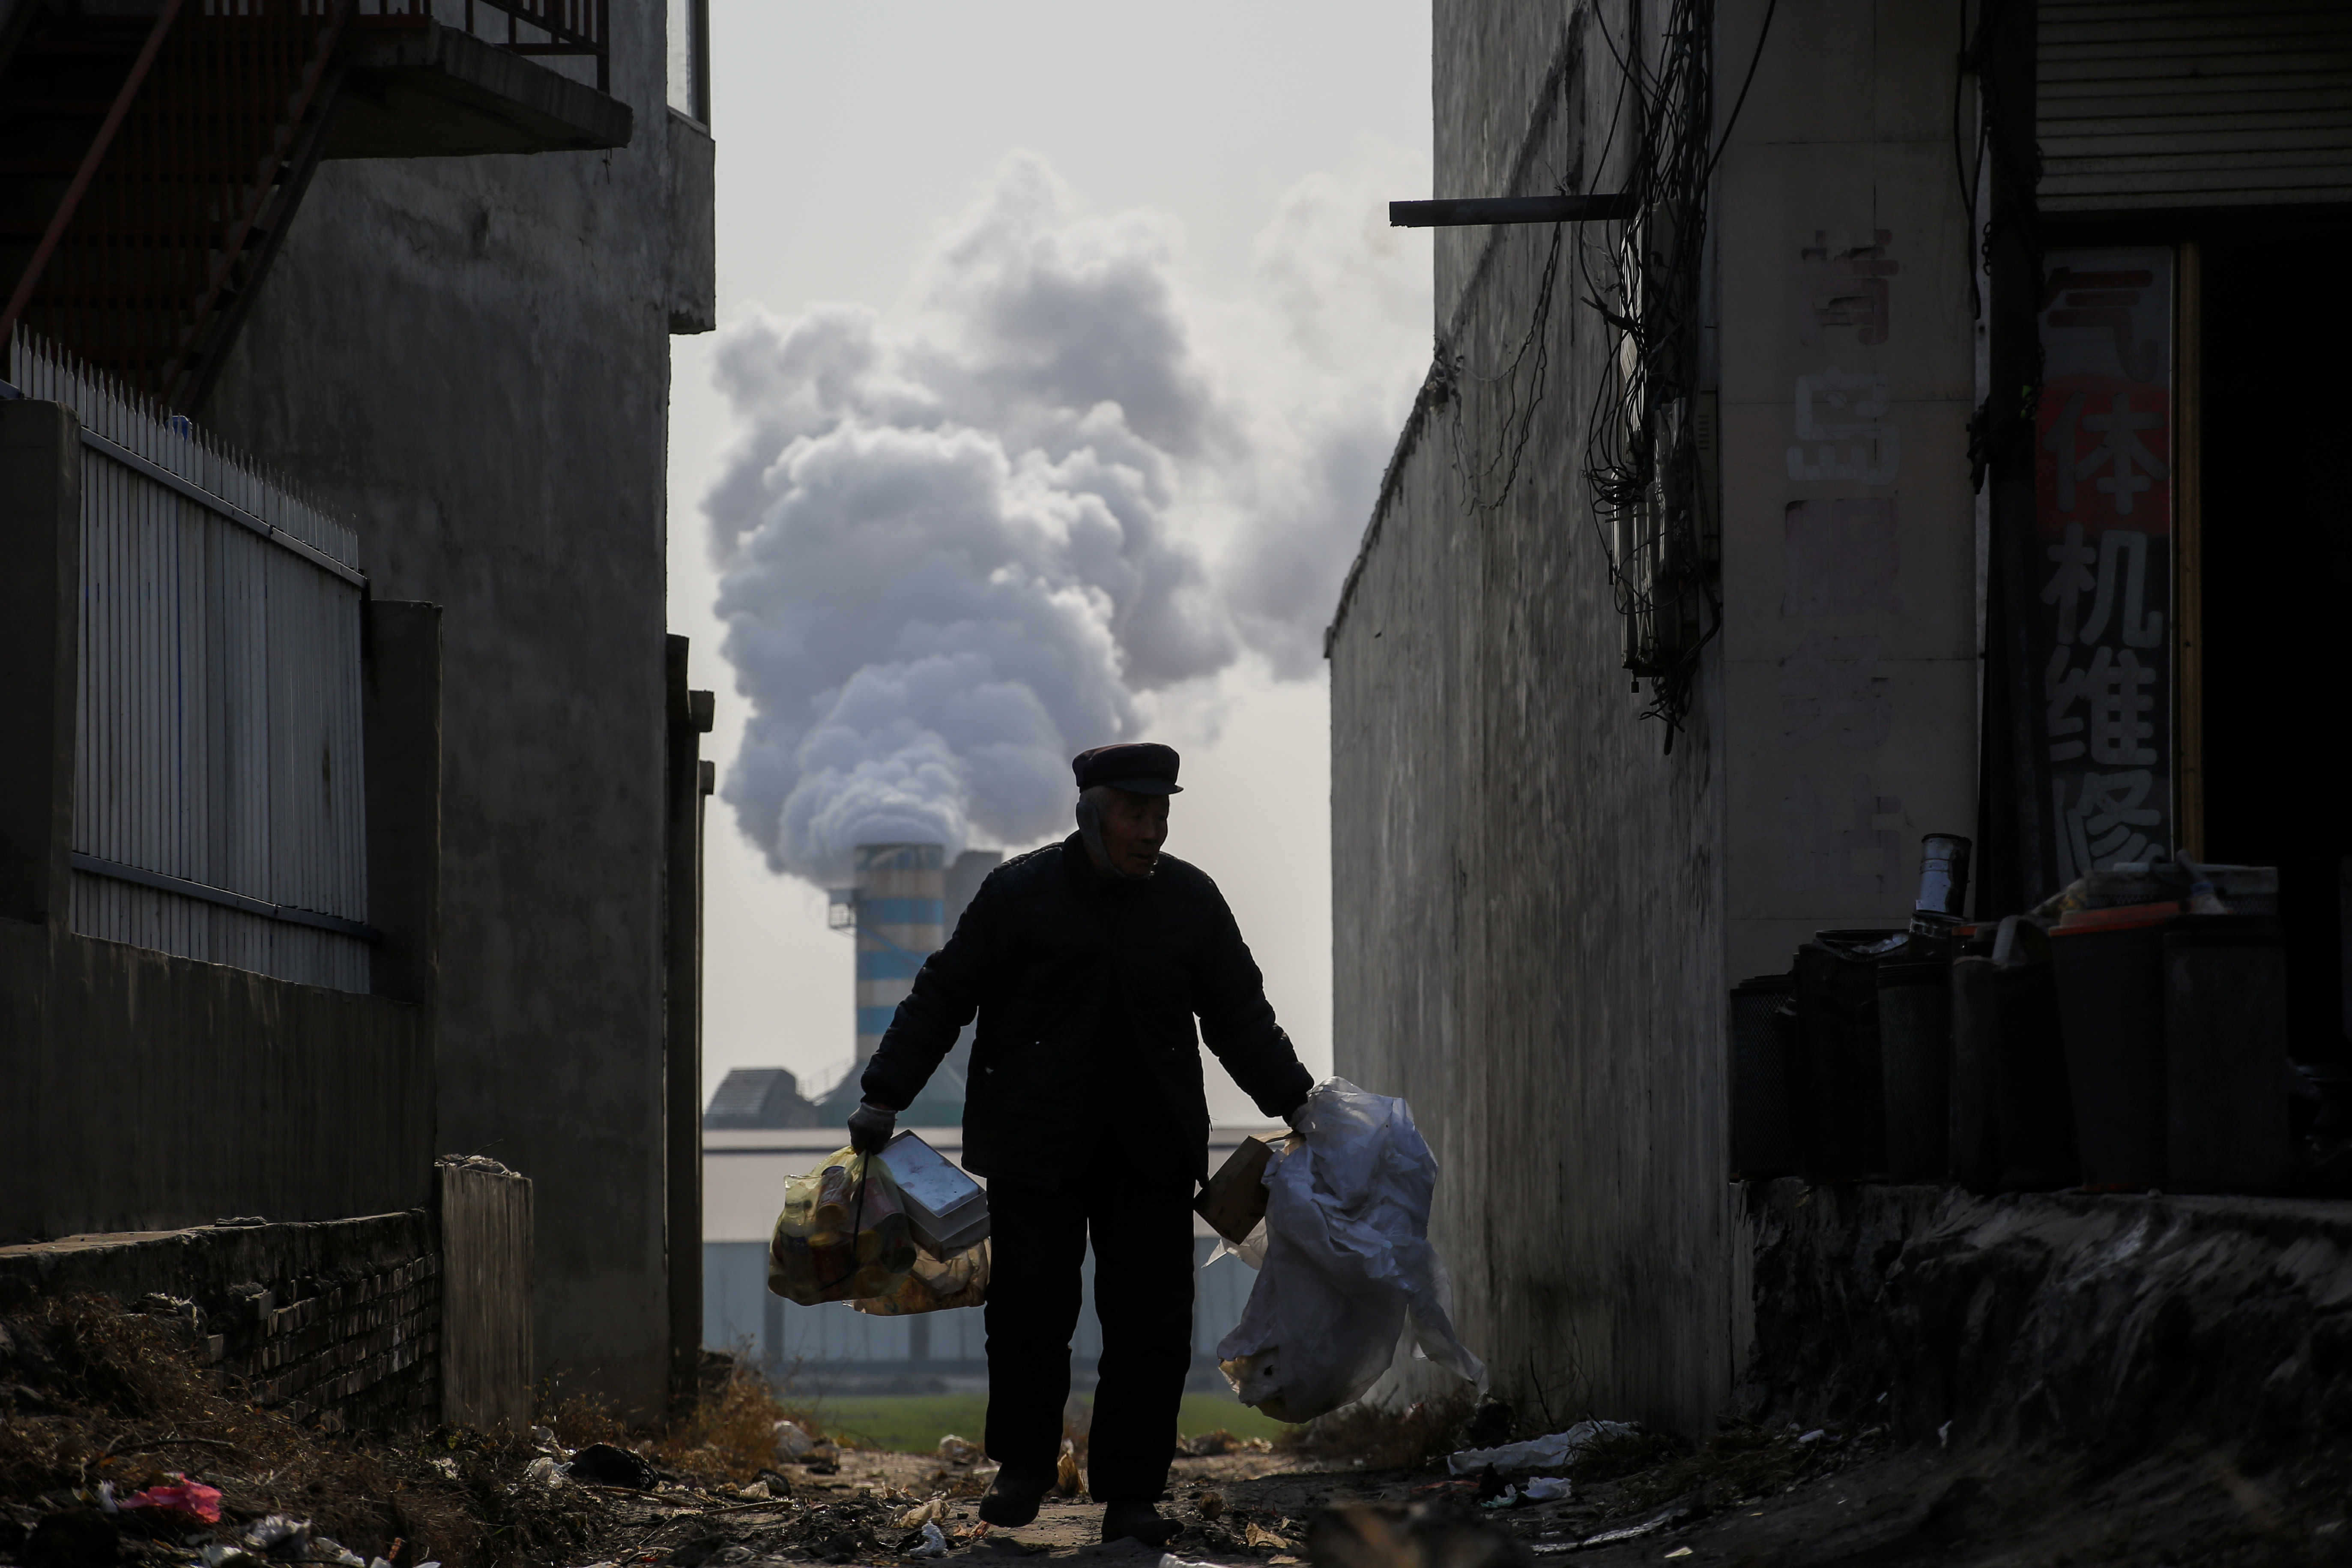 A man collects recyclables from an alley as smoke billows from the chimney of a factory in rural Gaoyi county near Shijiazhuang